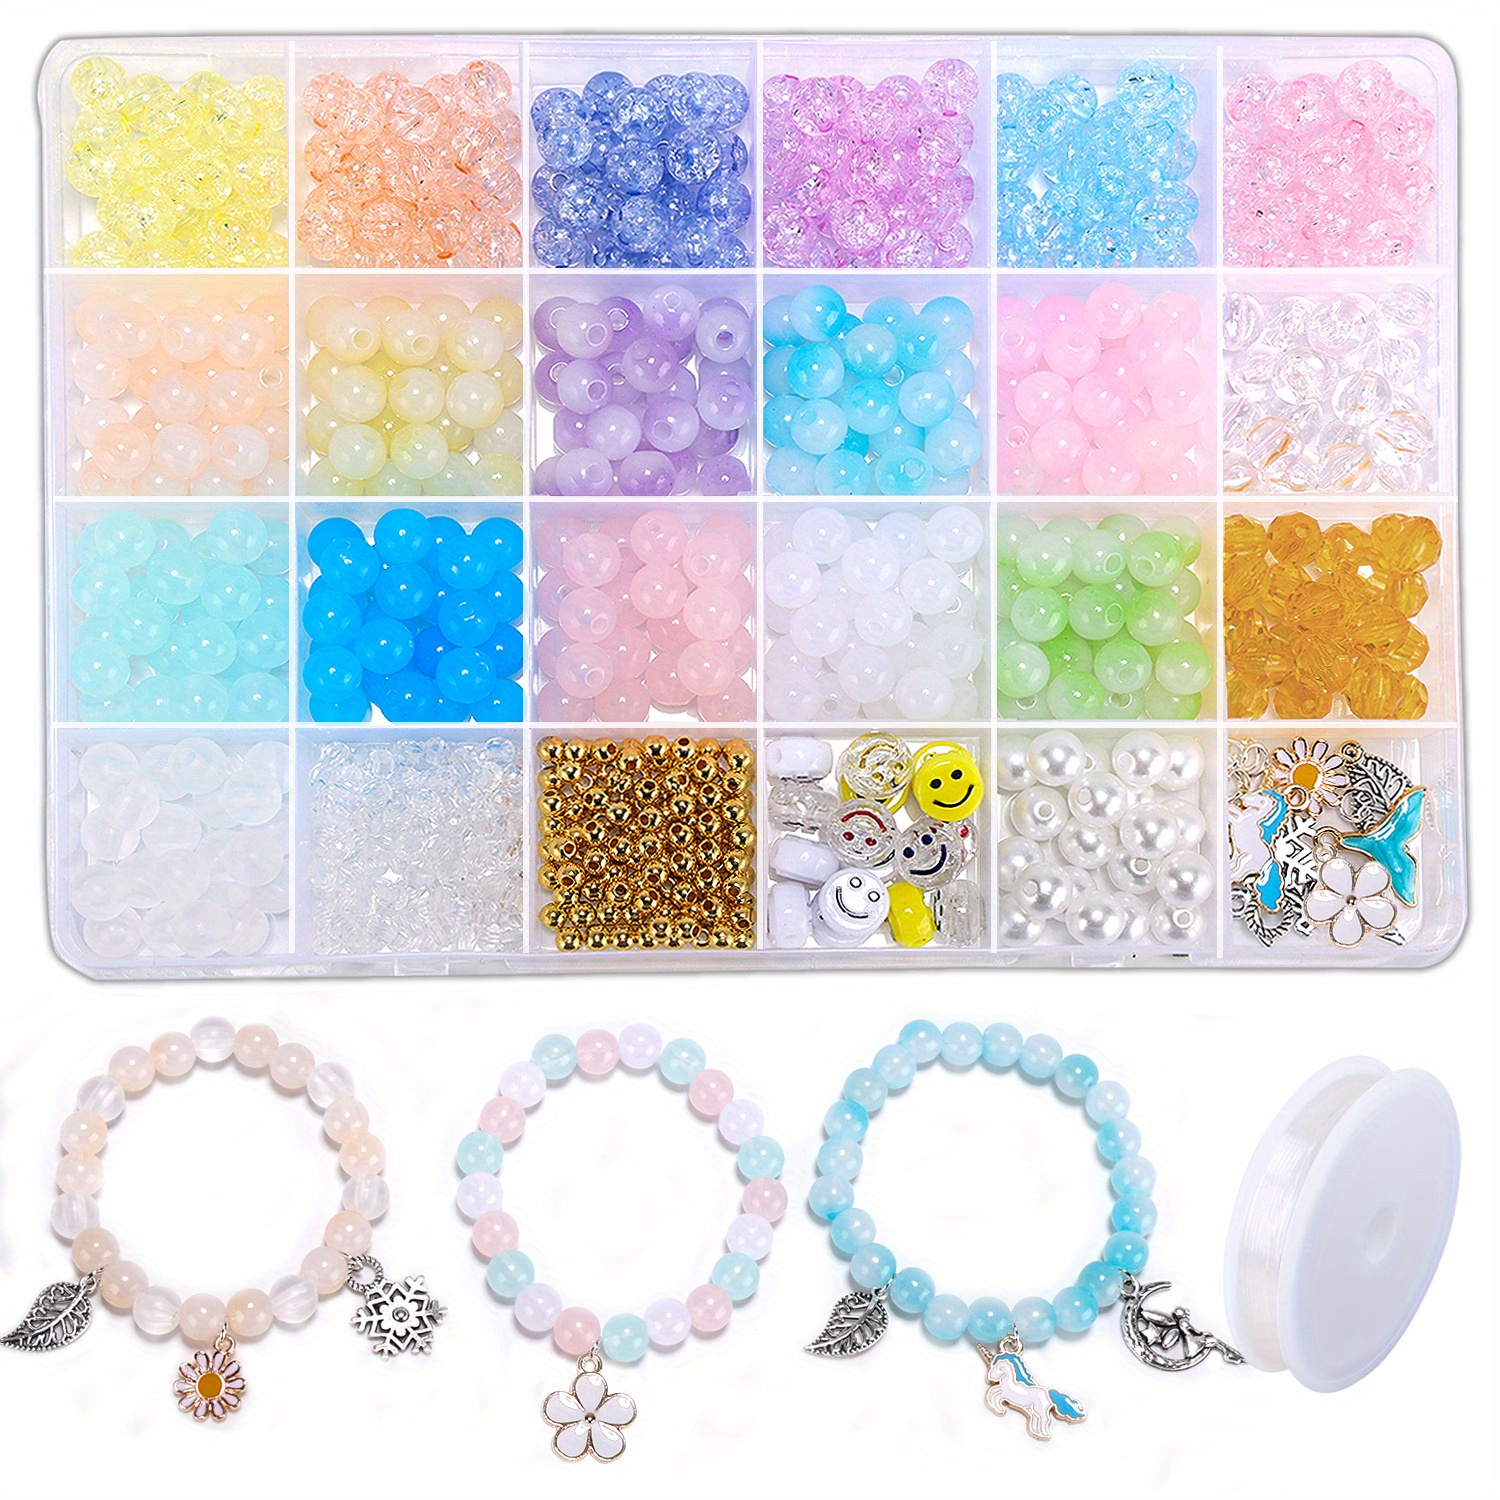 Bead Bracelet Making KitLetter Beads 4mm 3800pcs 24color Rainbow Beads  and 1200 pcs Alphabet Beadswith 3 Rolls of 10m Rope and PendantDIY Art  Craft Glass Beads for Bracelet and Jewelry Making 